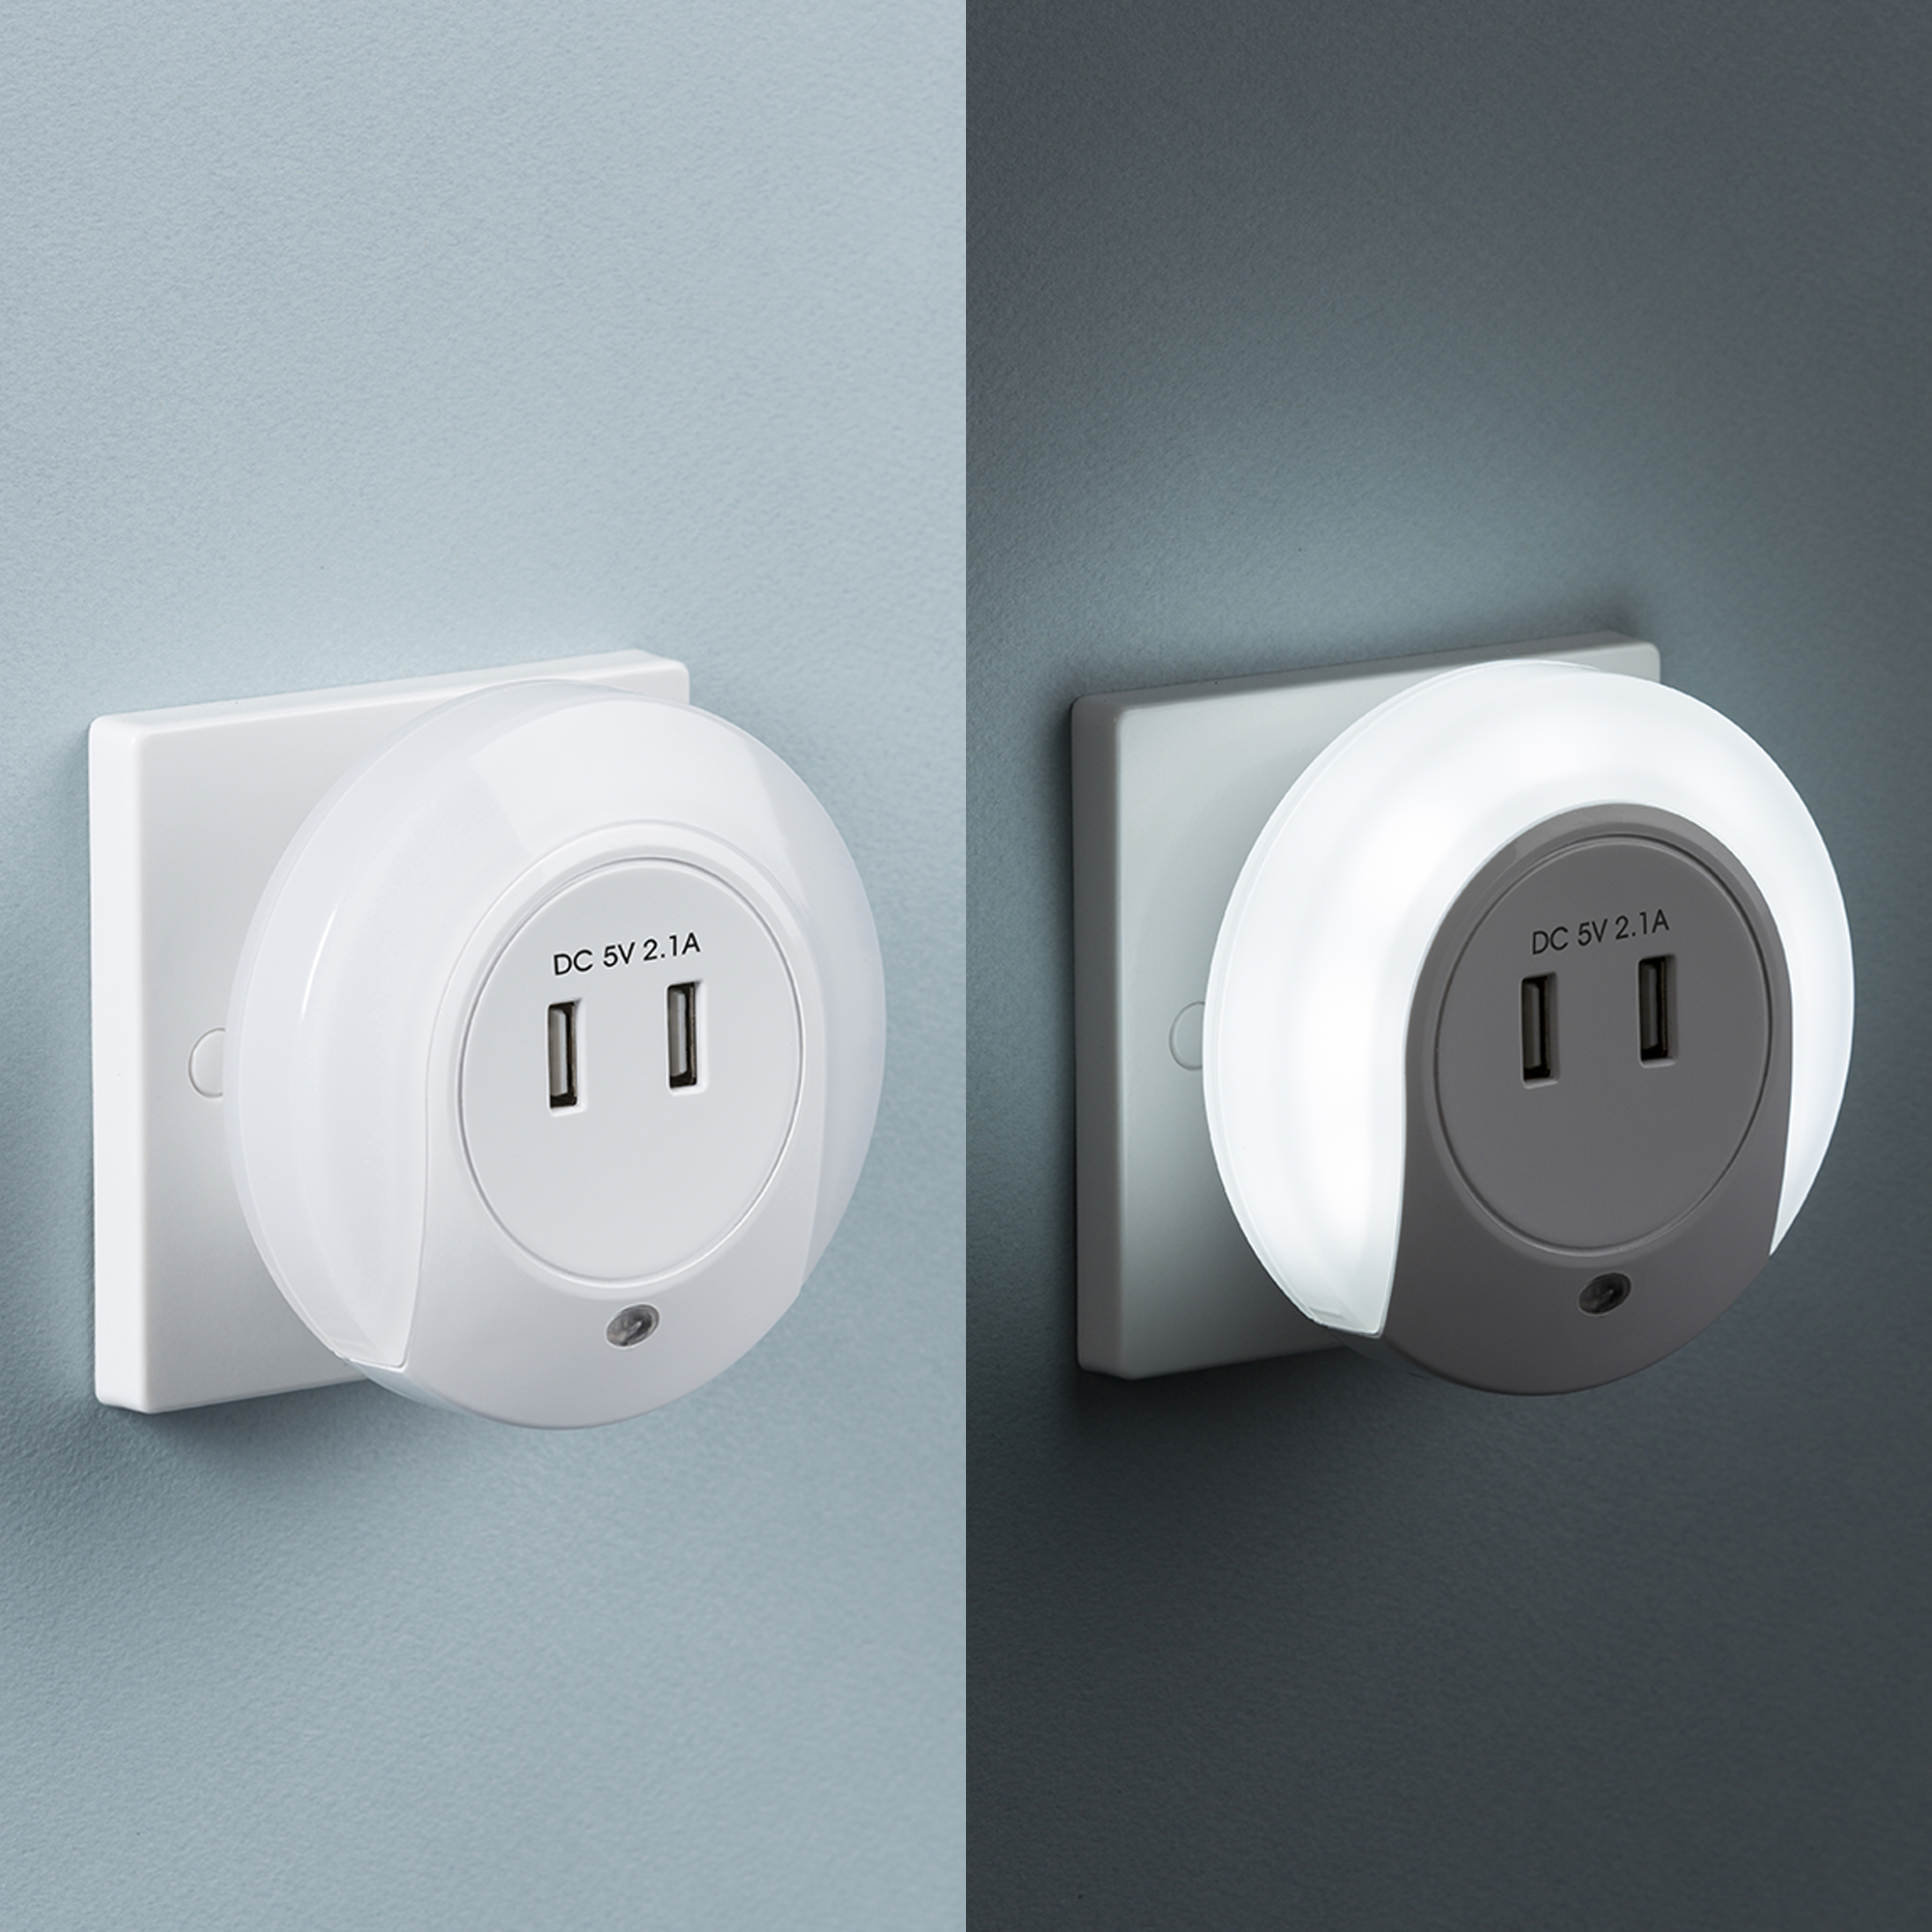 Plug In LED Night Light With Dual USB Charger Ports 5V DC 2.1A (shared) - NL002 